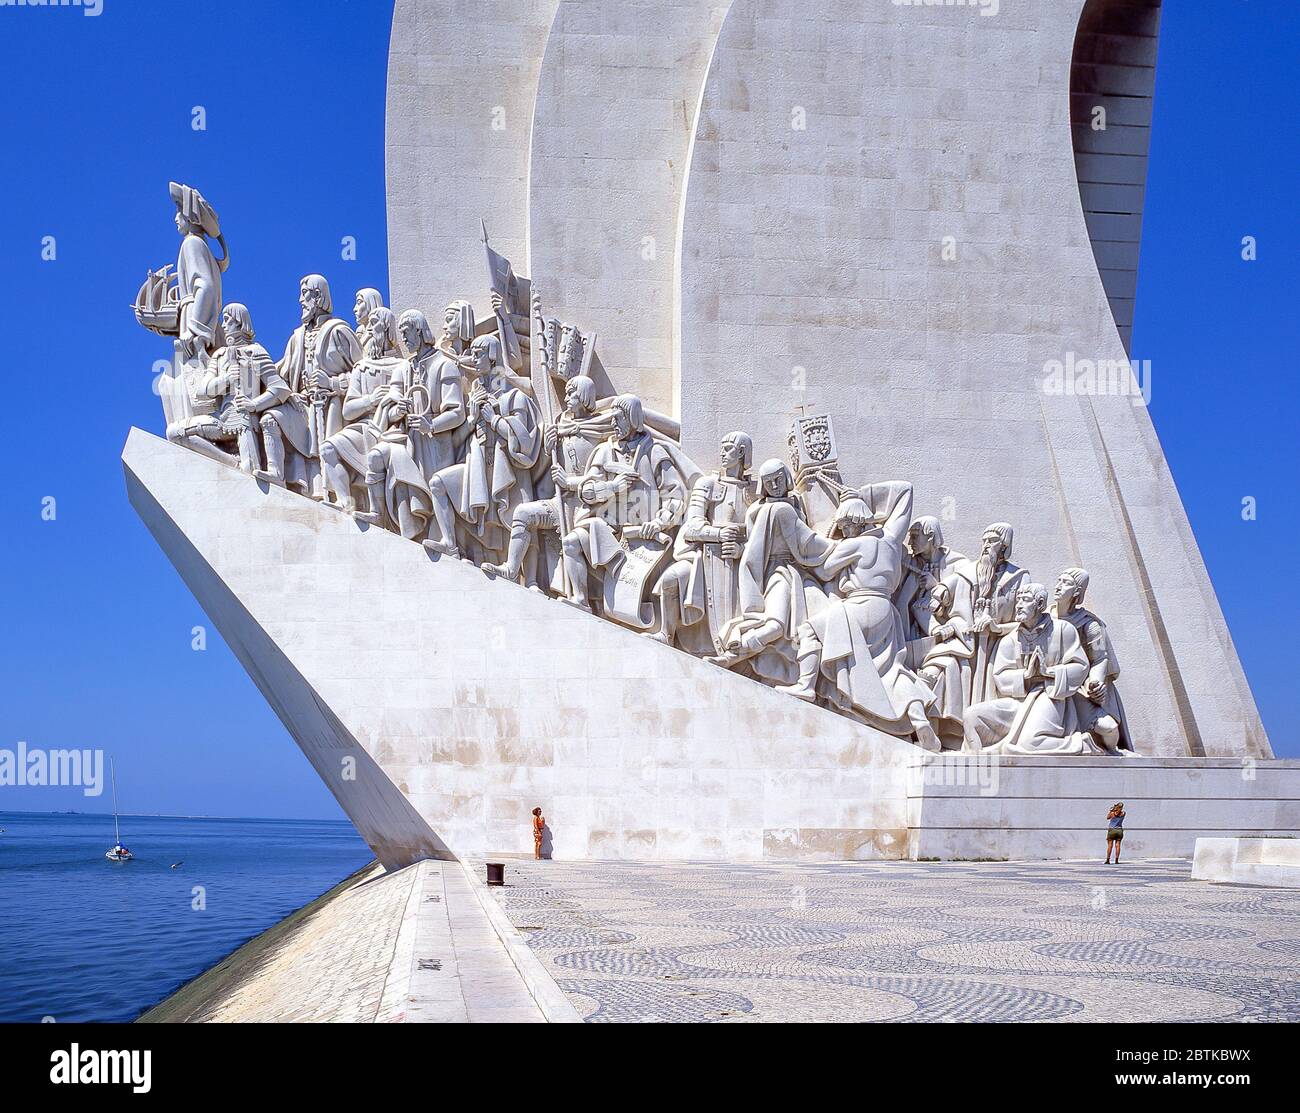 Monument to the Discoveries (Padrao dos Descobrimentos) on bank of Tagus River, Belem District, Lisbon, Portugal Stock Photo